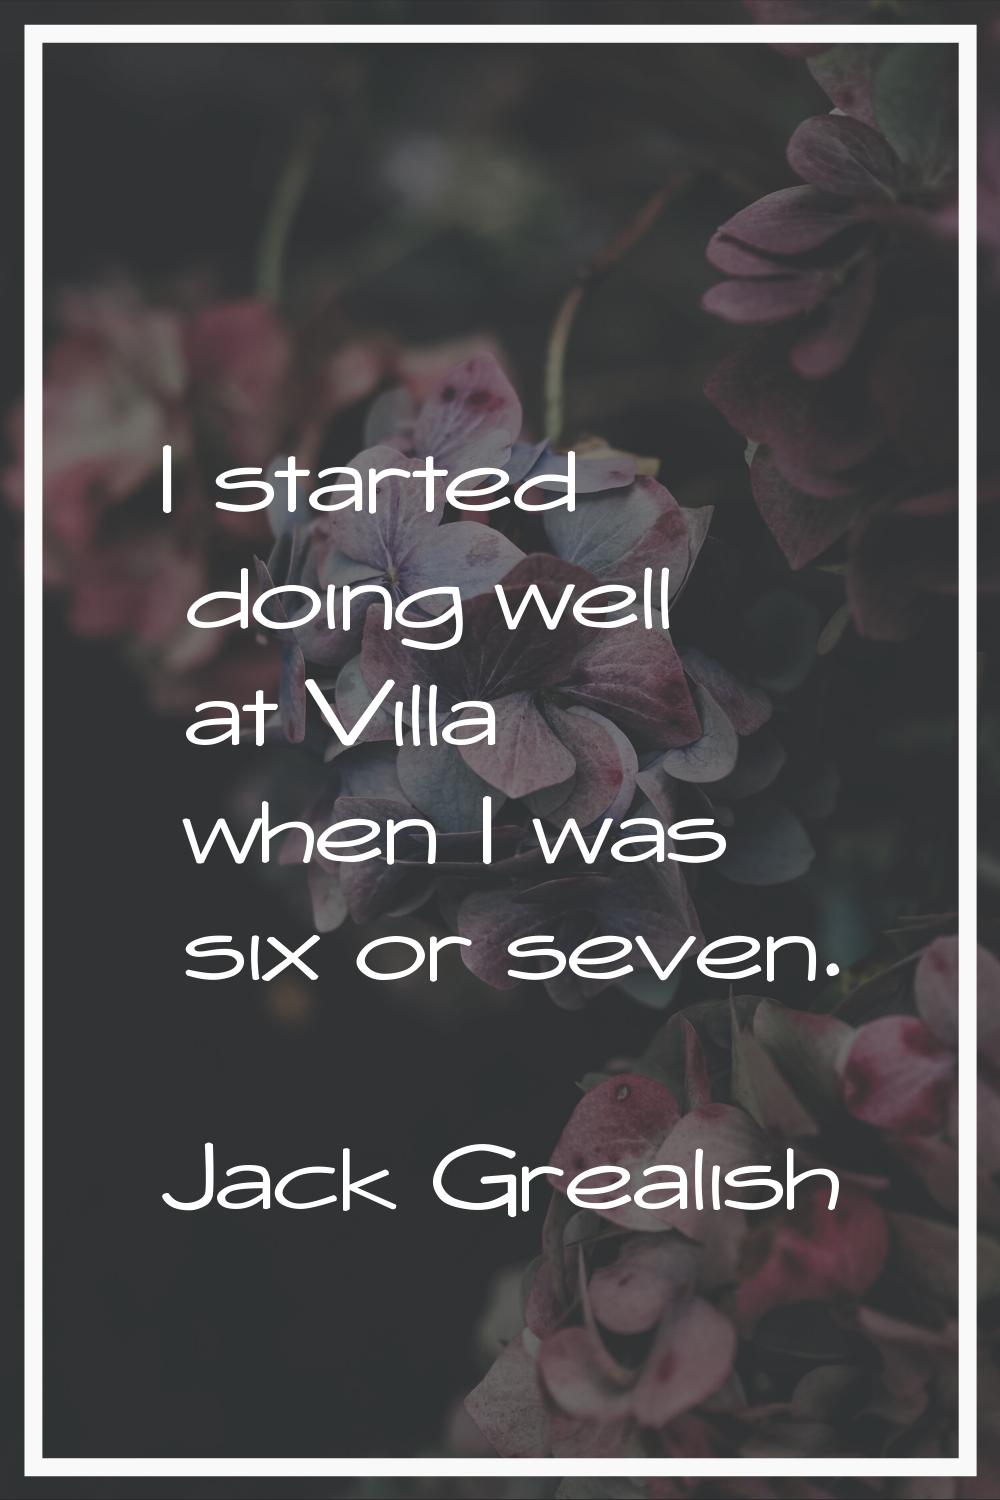 I started doing well at Villa when I was six or seven.